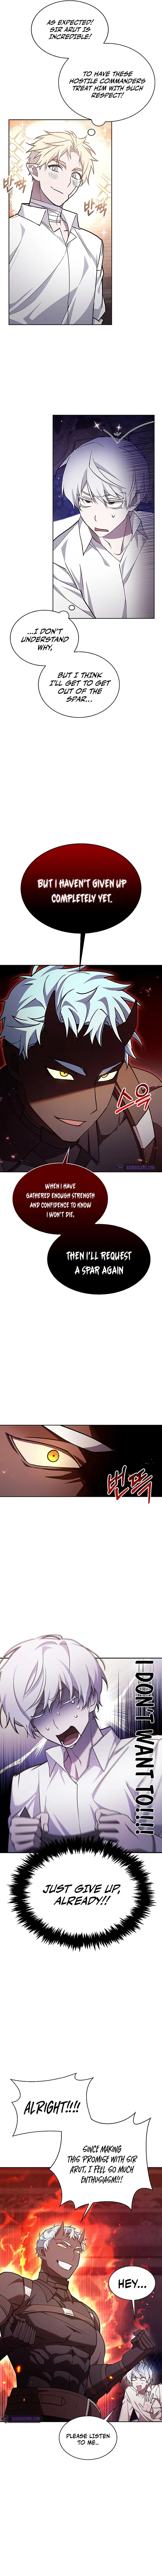 I’m Not That Kind of Talent Chapter 5 page 6